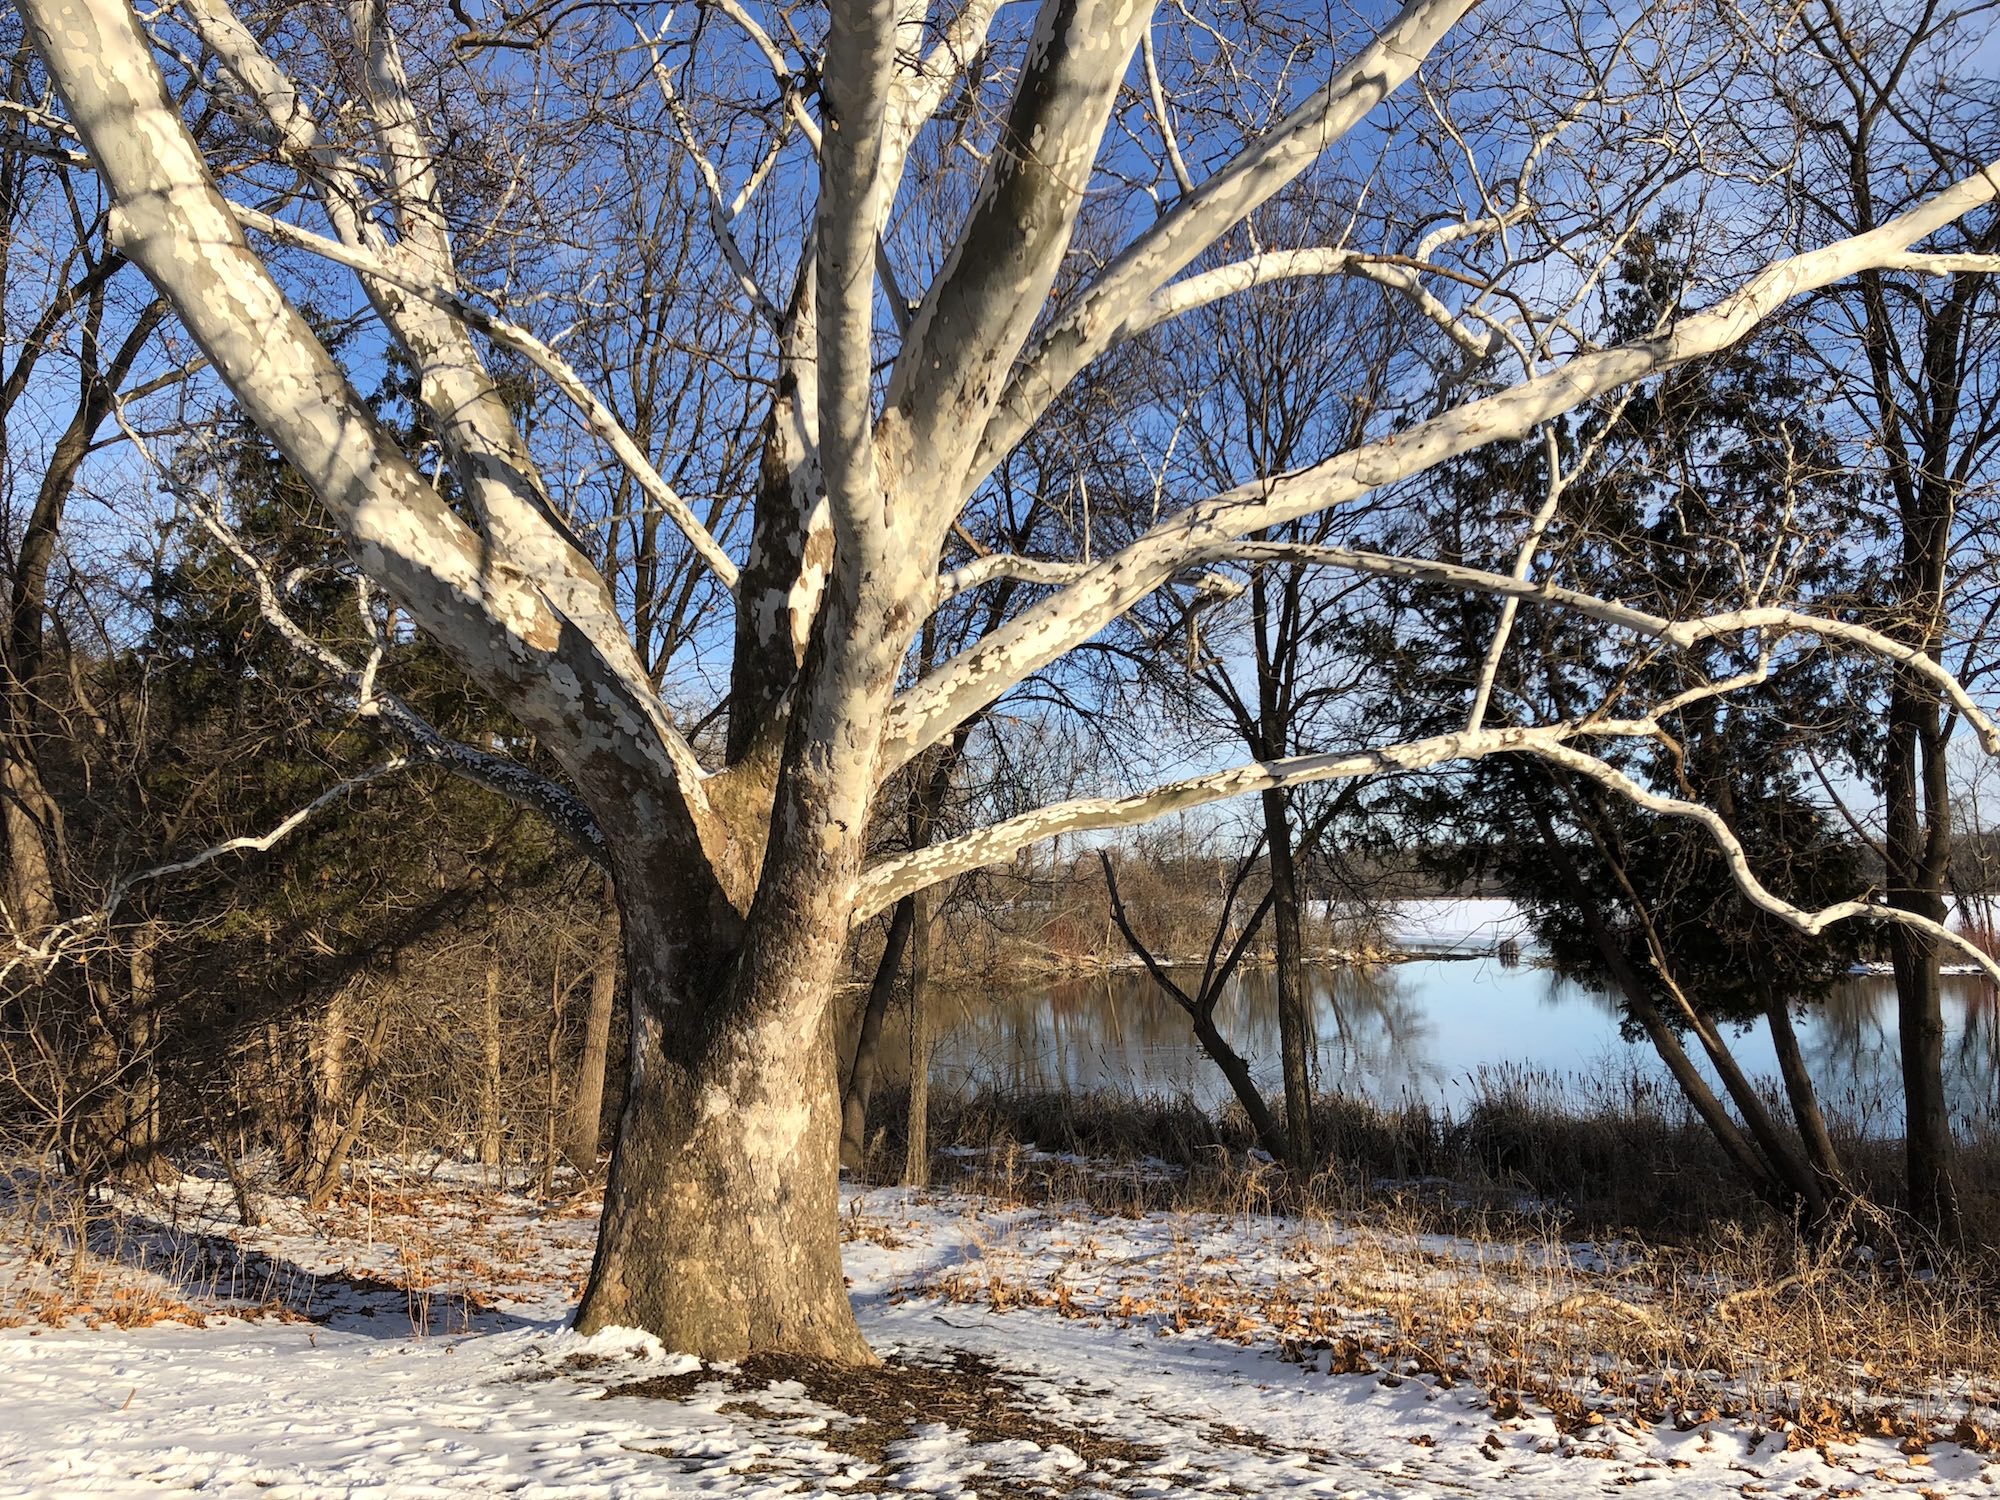 Sycamore tree between Ho-Nee-Um Pond and Arbor Drive on north shore of Lake Wingra on March 9, 2018.